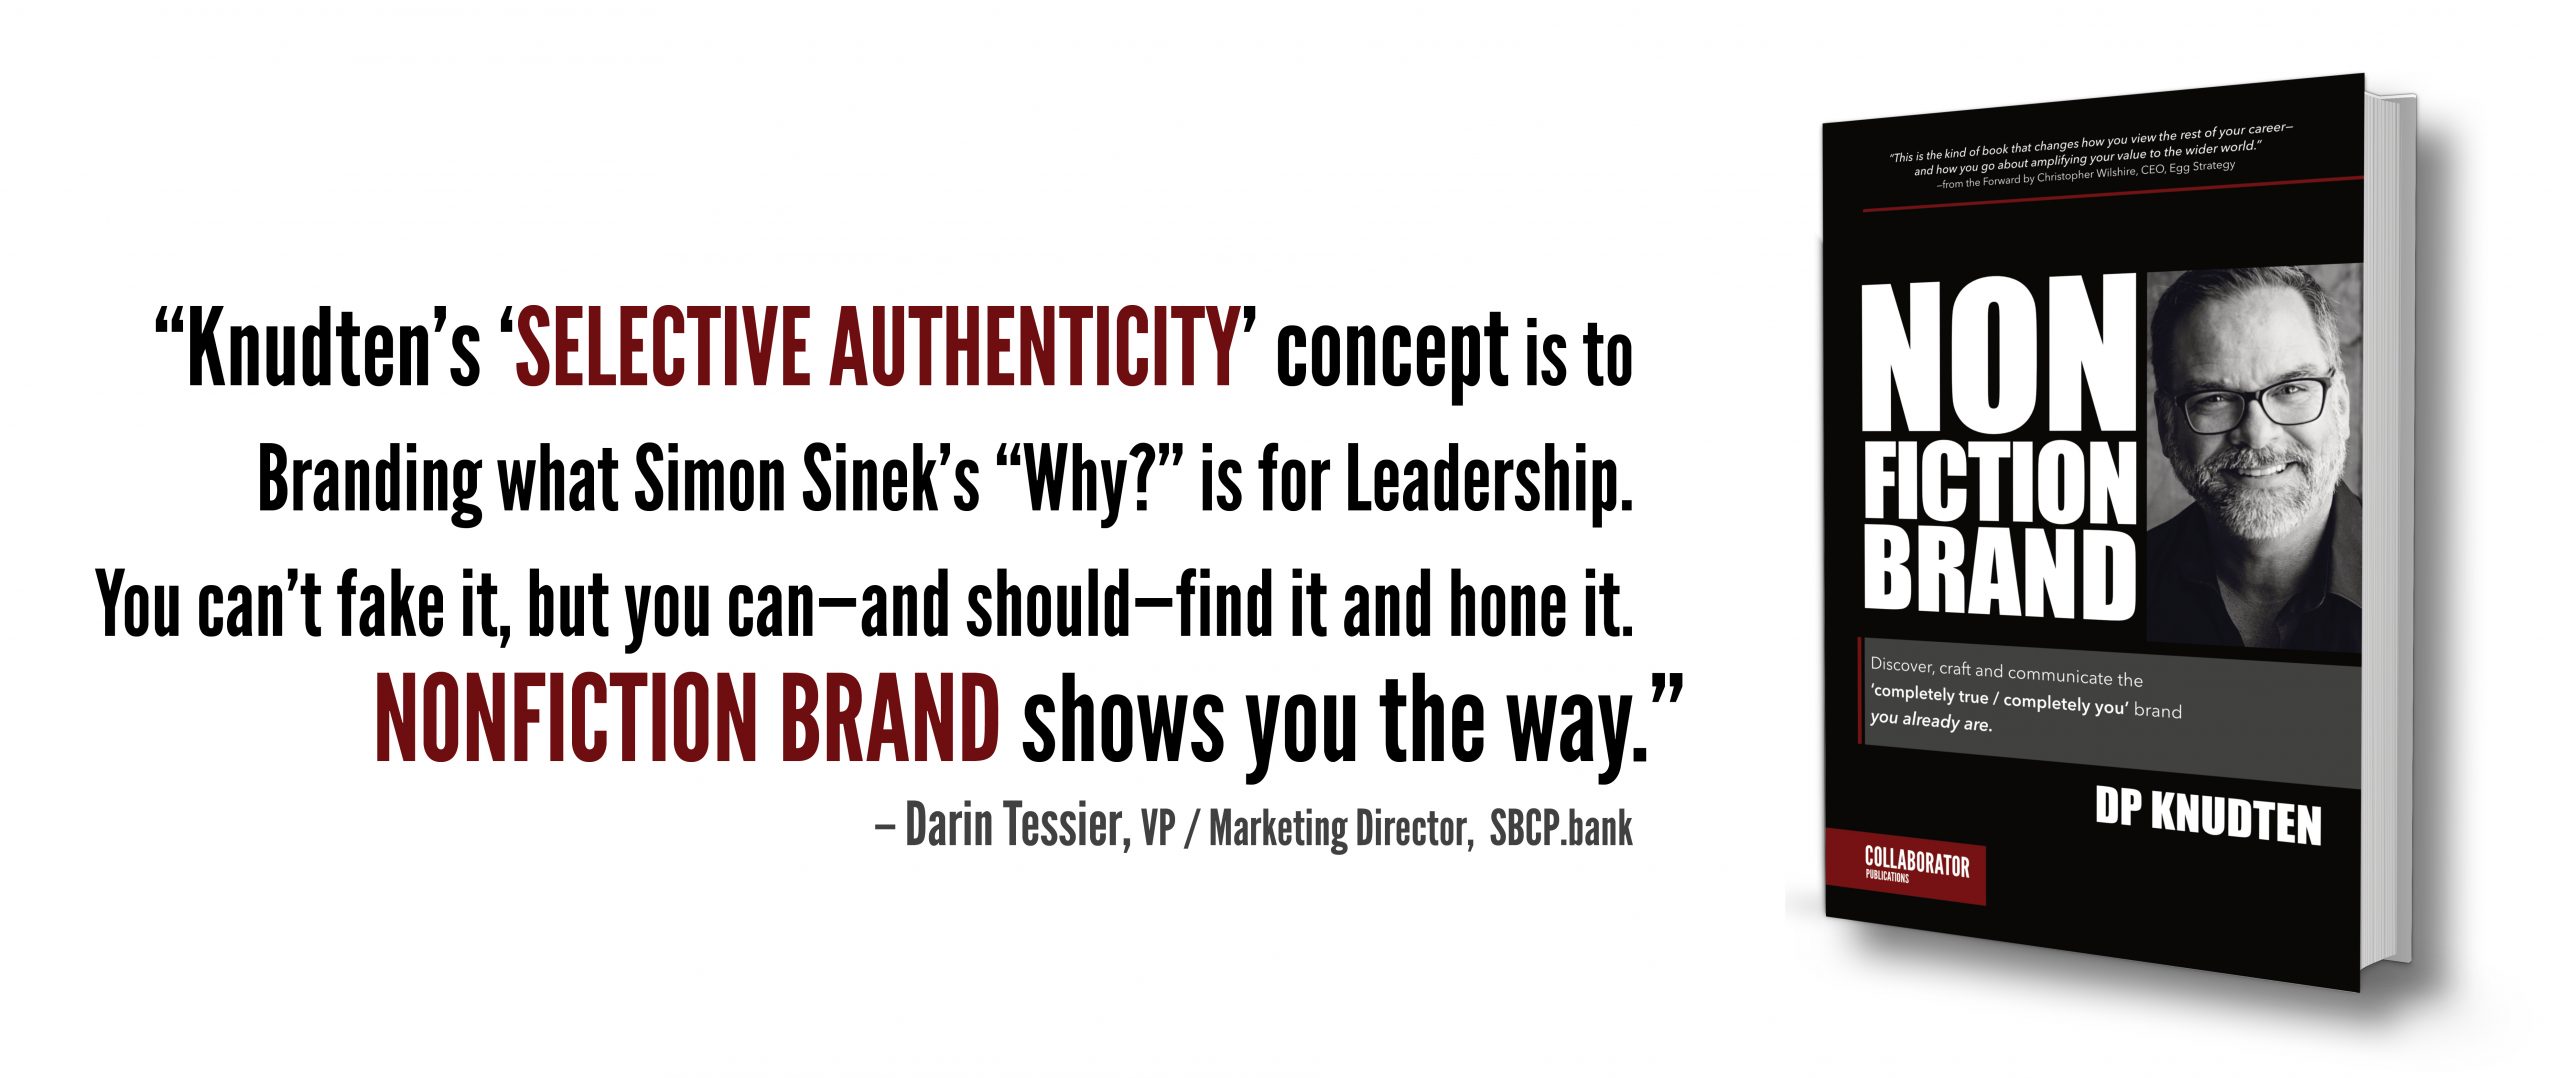 Darin Tessier's NONFICTION BRAND book blurb: "“Knudten's “Selective Authenticity" concept is to Branding what Simon Sinek's "Why?" is for Leadership.You can't fake it, but you can—and should—find it and hone it. NONFICTION BRAND shows you the way.”